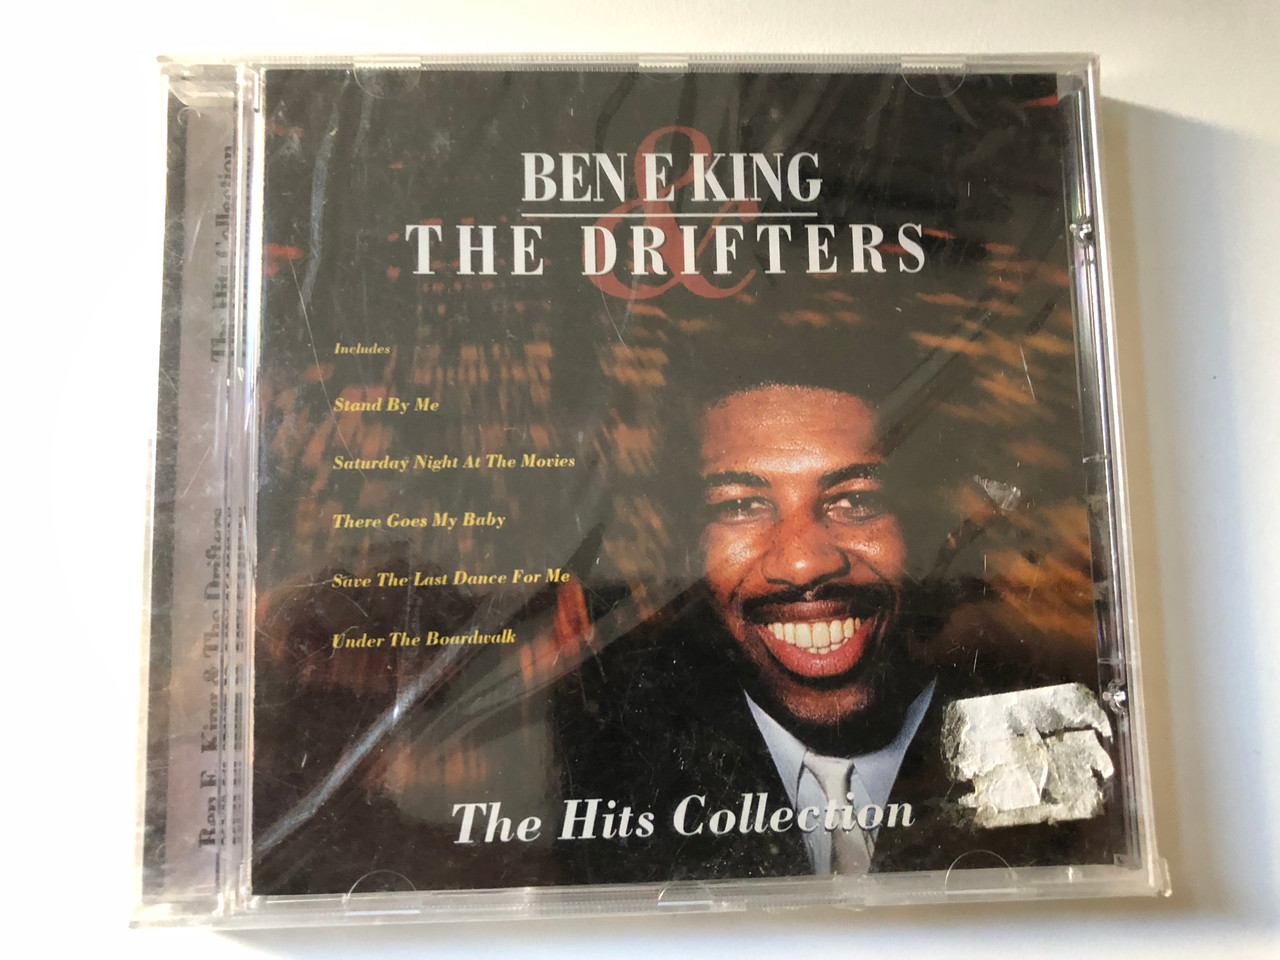 https://cdn10.bigcommerce.com/s-62bdpkt7pb/products/0/images/200981/Ben_E._King_The_Drifters_The_Hits_Collection_Includes_Stand_By_Me_Saturday_Night_At_The_Movies_There_Goes_My_Baby_Save_The_Last_Dance_For_Me_Under_The_Boardwalk_CMC_Home_Entertainme_1__50281.1638450264.1280.1280.JPG?c=2&_gl=1*mwyy3z*_ga*MjA2NTIxMjE2MC4xNTkwNTEyNTMy*_ga_WS2VZYPC6G*MTYzODQ0MDM5Mi4xOTkuMS4xNjM4NDUwMjUwLjYw